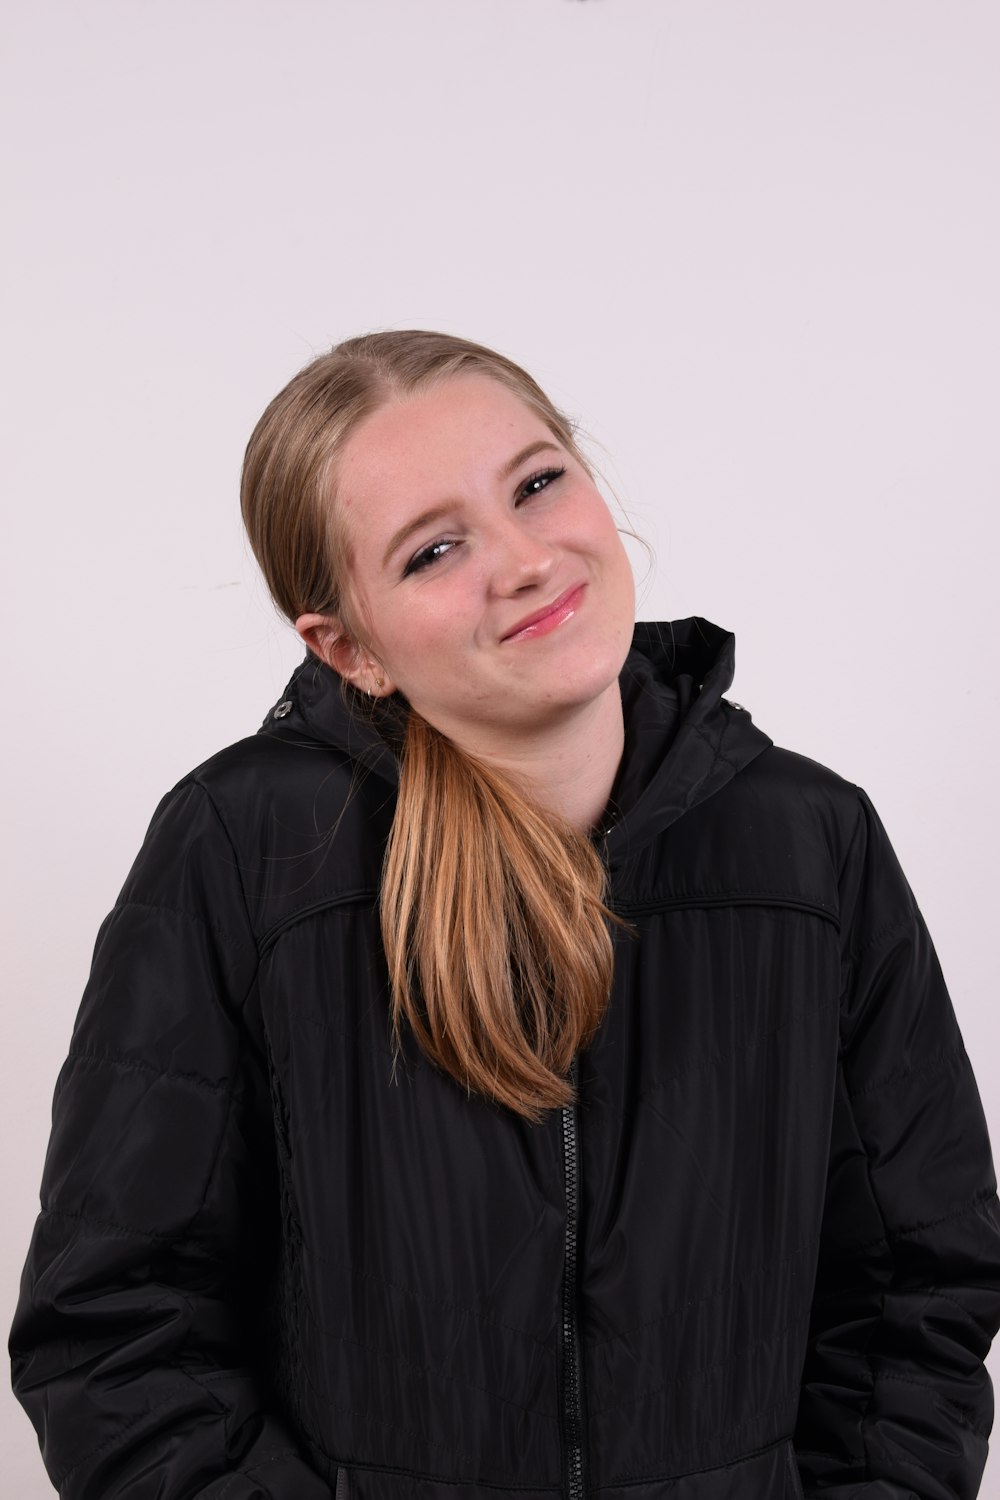 a girl in a black jacket posing for a picture